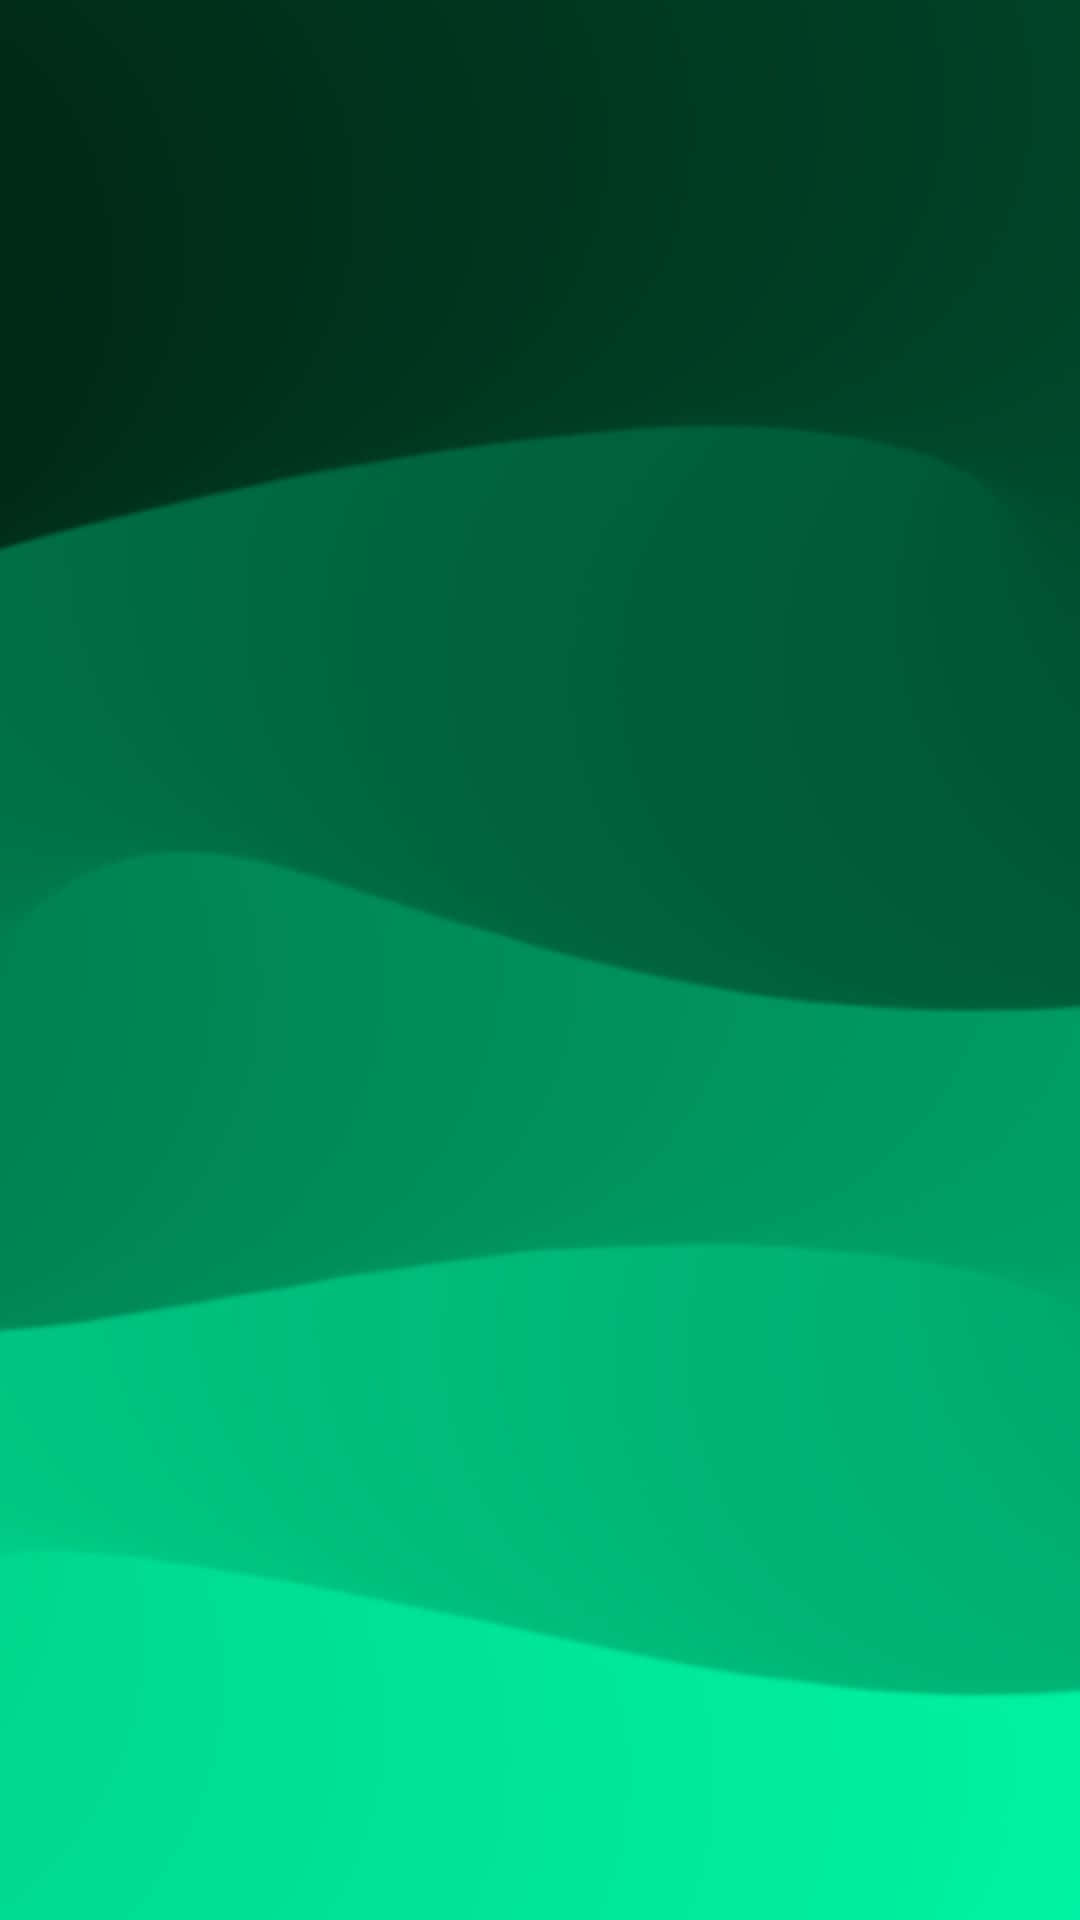 Get inspired by the beautiful green gradient background